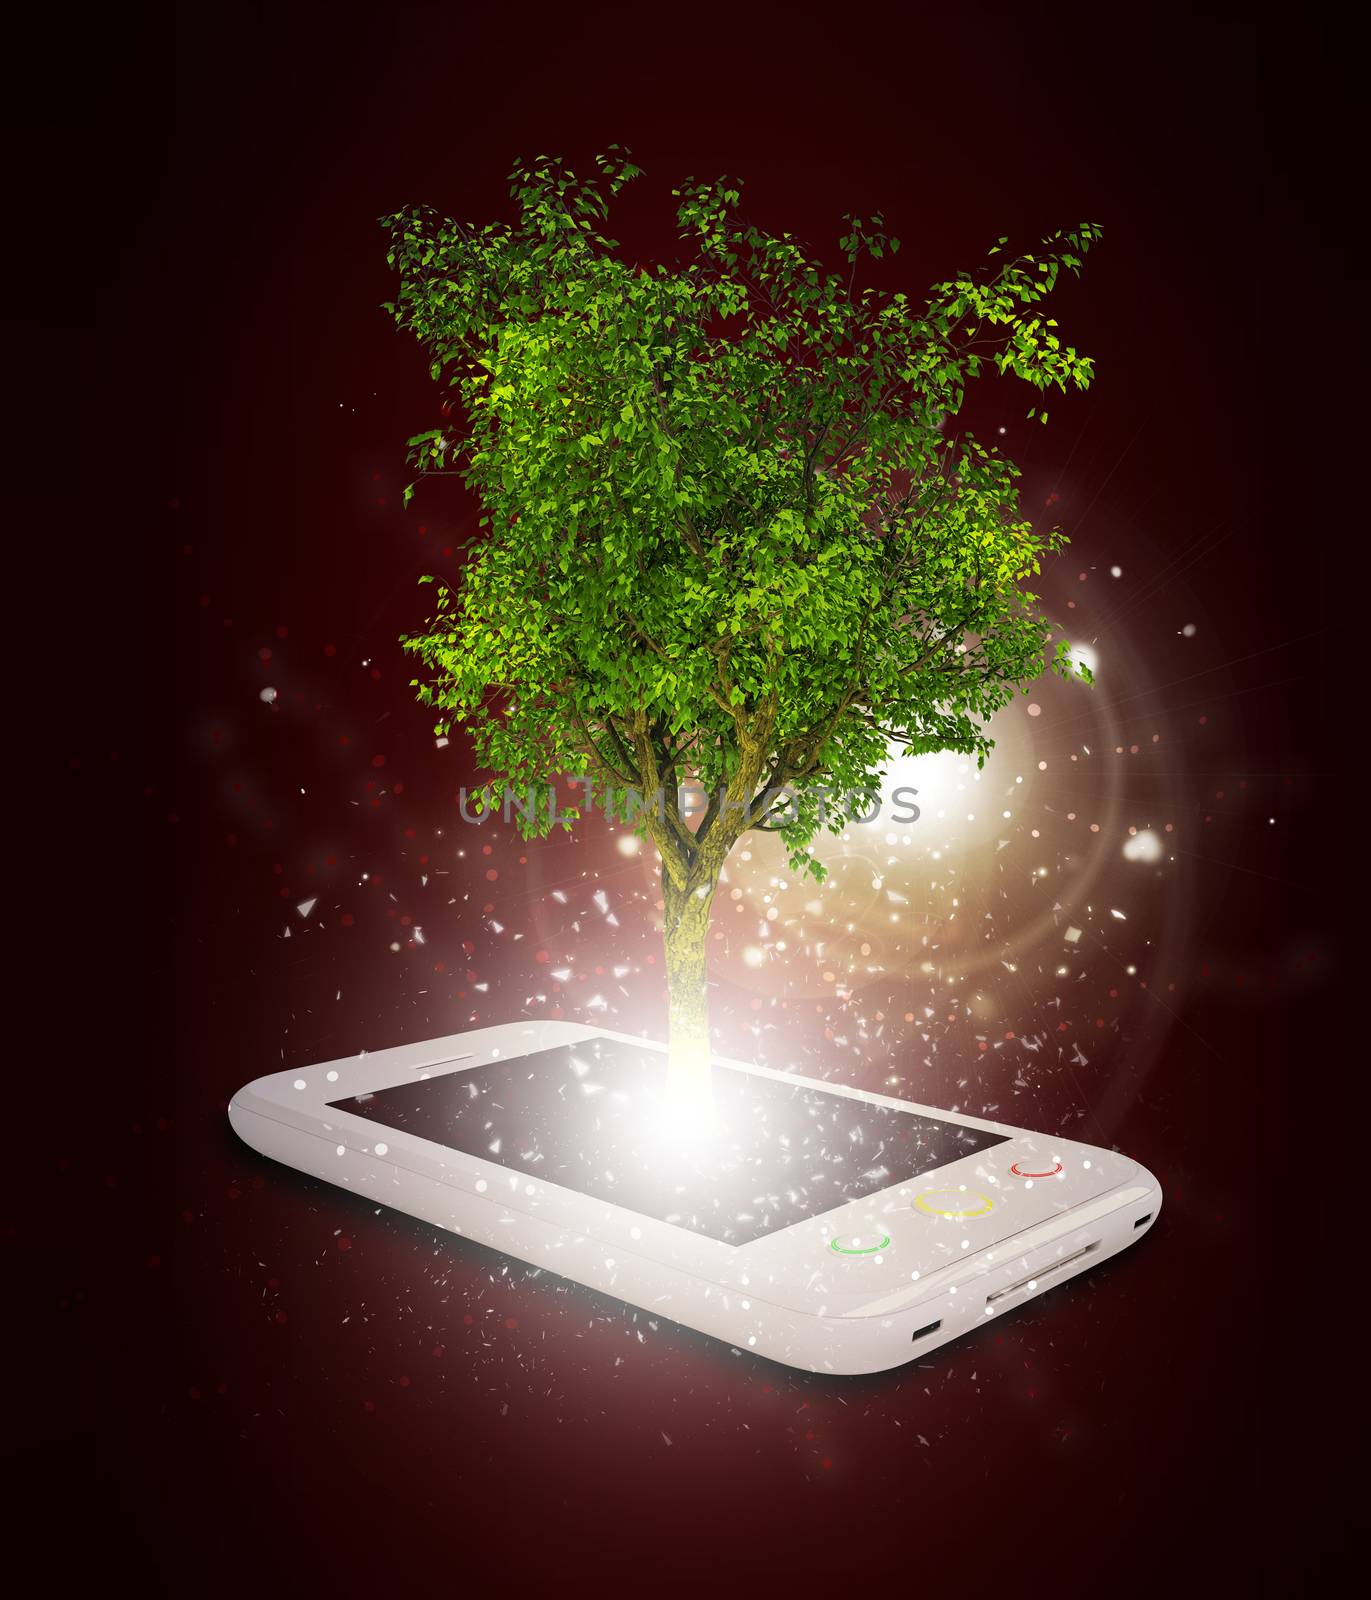 Smart phone with magical green tree and rays of light on dark background